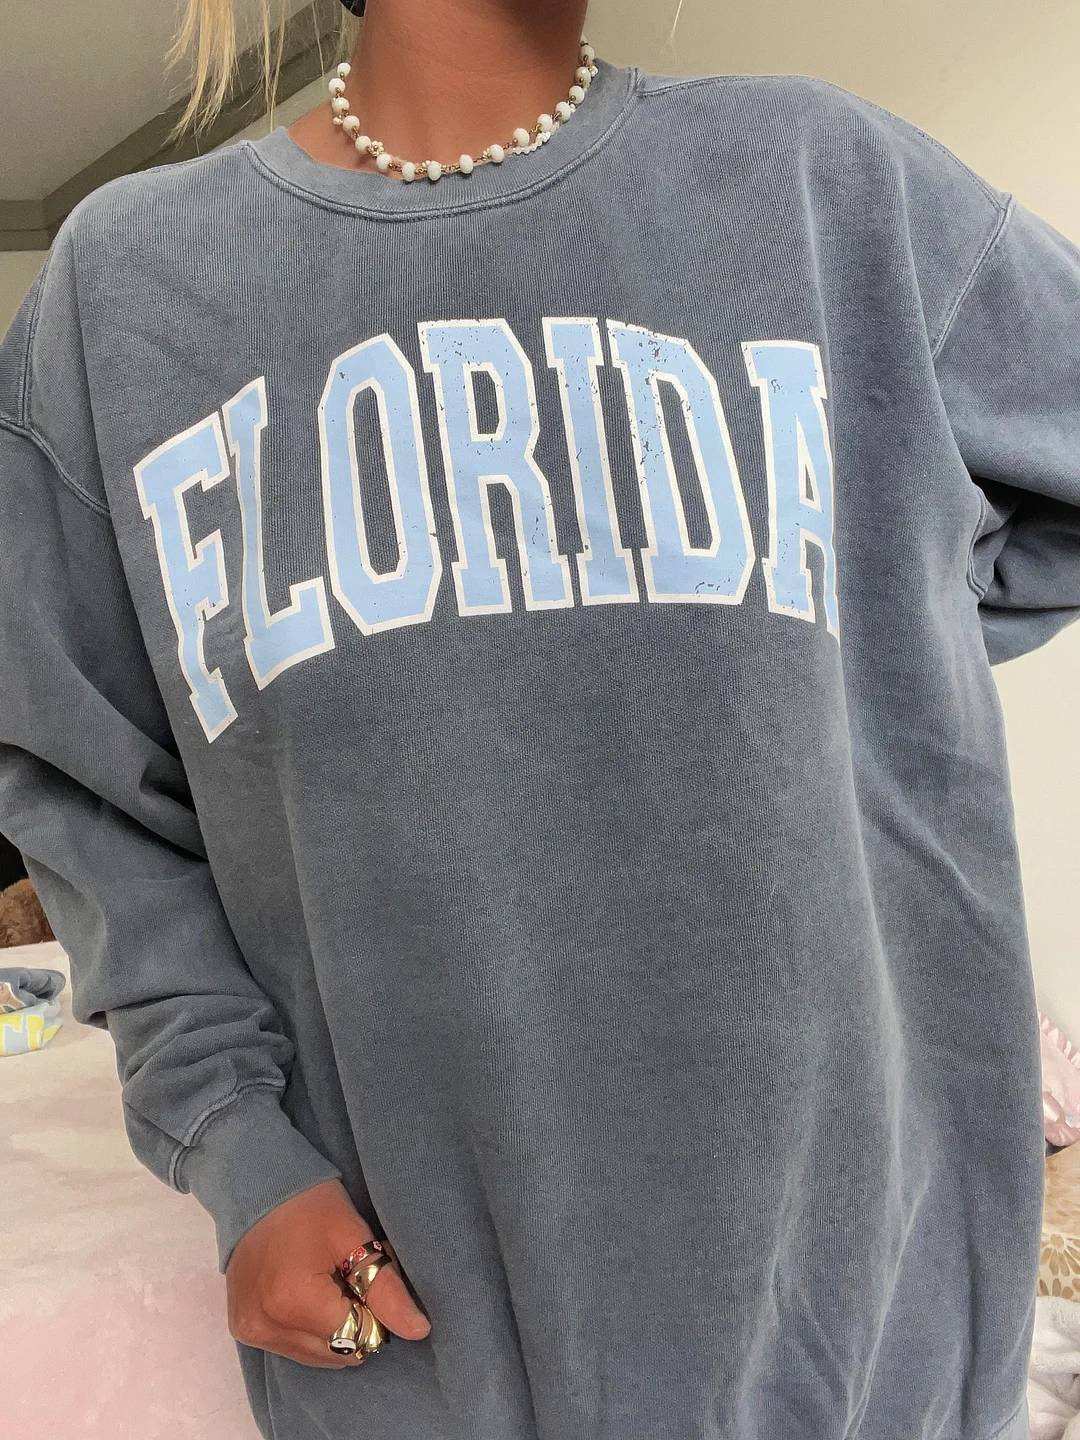 vintage outfits_florida sweatshirt grey_cute outfits_trendy outfit_women casual outfits_august lemonade